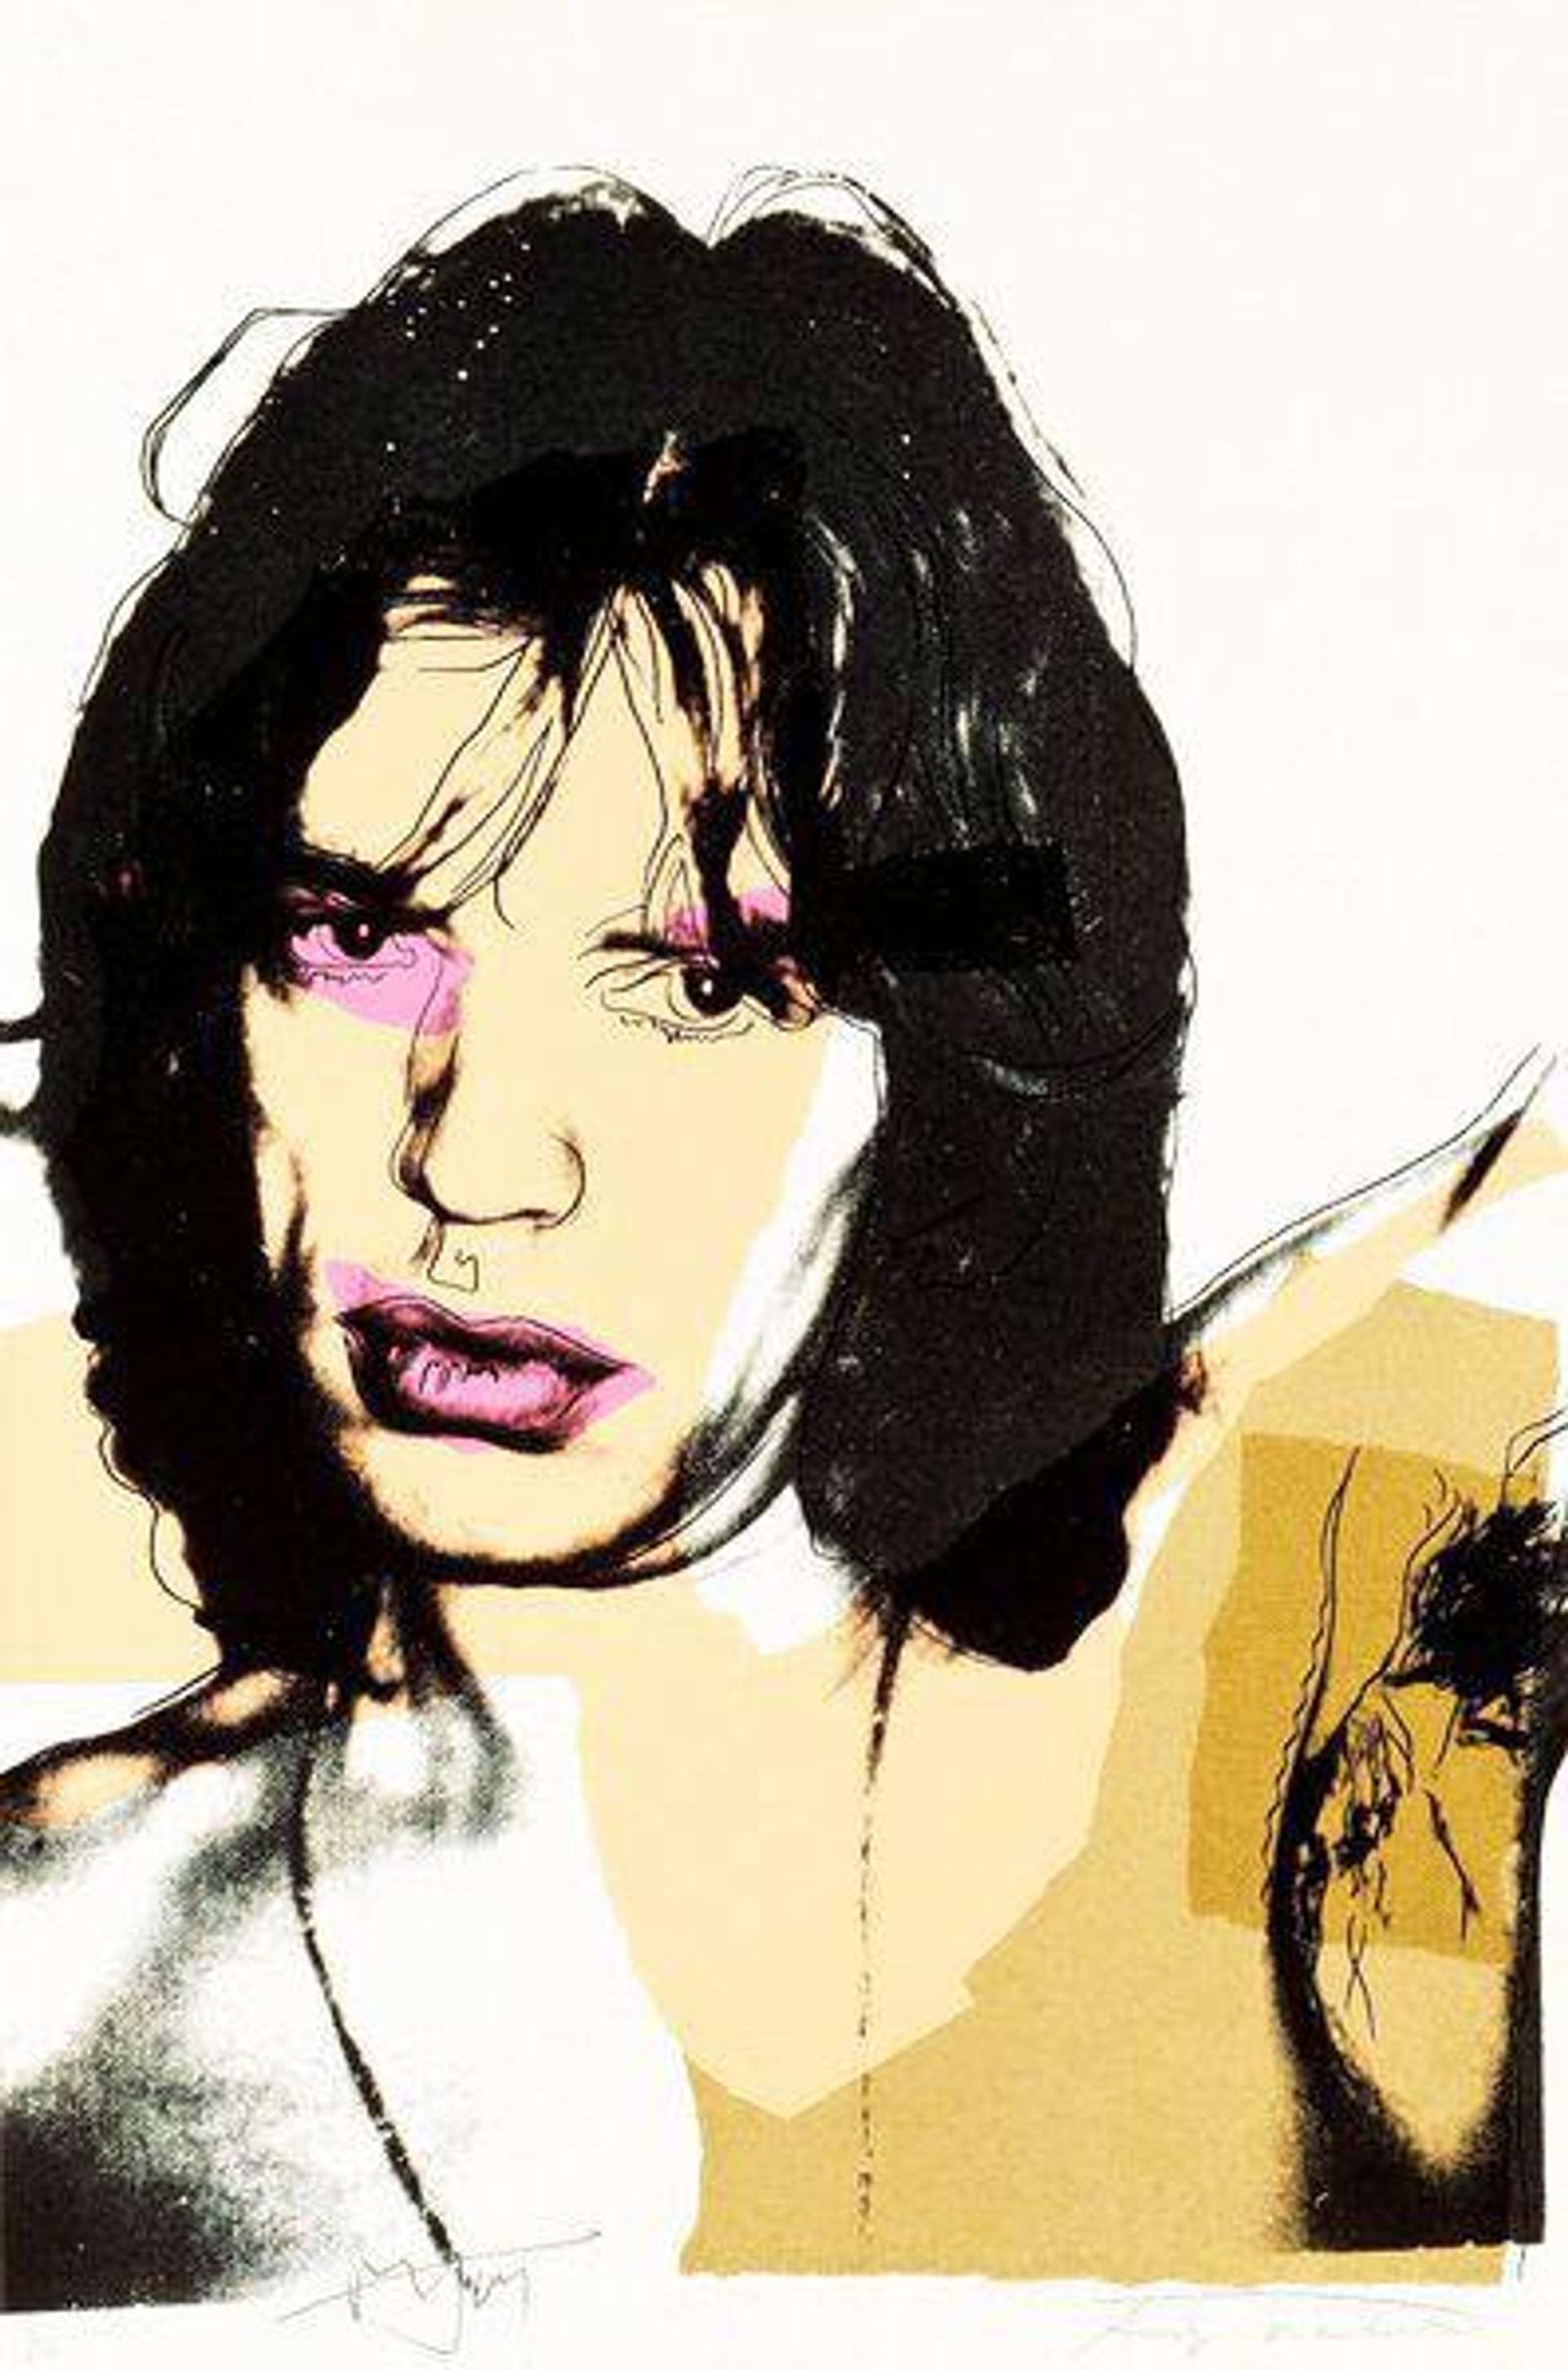 Andy Warhol’s Mick Jagger (F. & S. II.141). A Pop Art screen print of a black and white image of Mick Jagger with the colour pink on his lips and parts of his eyes. The rest of his body has shades of yellow covering him. 